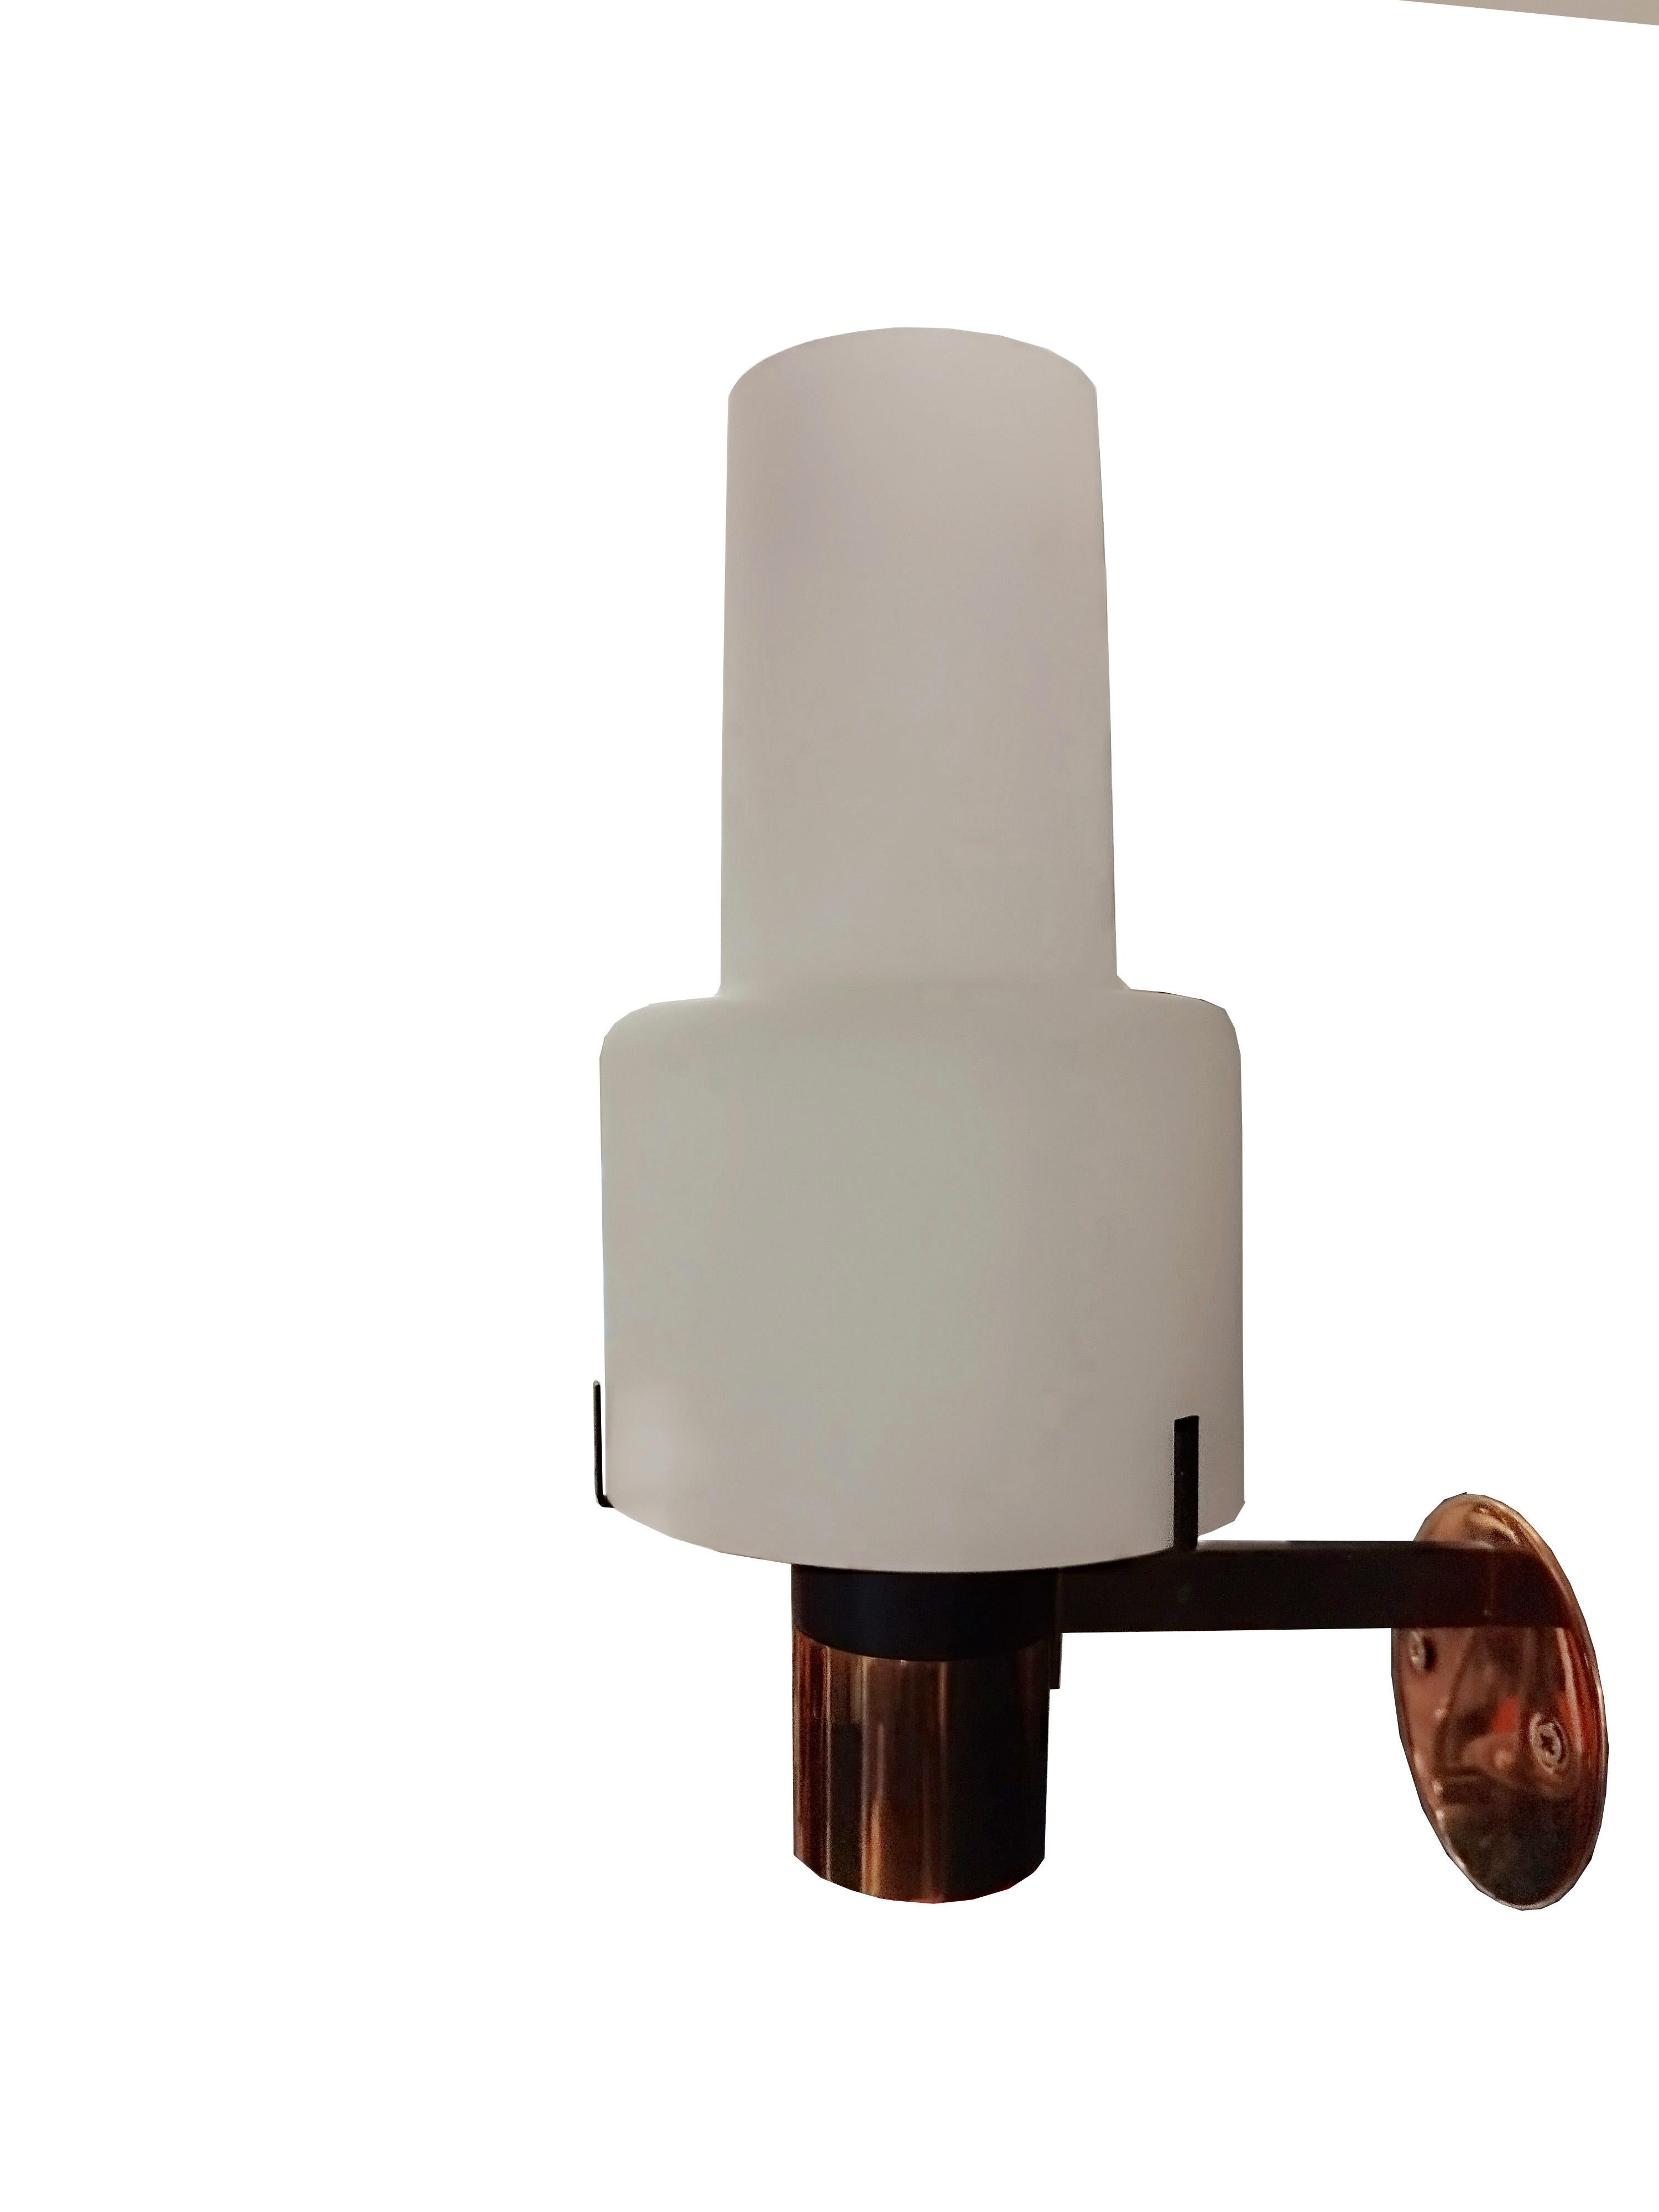 Large Stilnovo Model 2079/1 brass and opaline glass wall sconce from the 1950s. Executed in brass, painted metal, and thick blown opaline glass. A sculptural and refined design, characteristic of mid-century Italian lighting at its highest